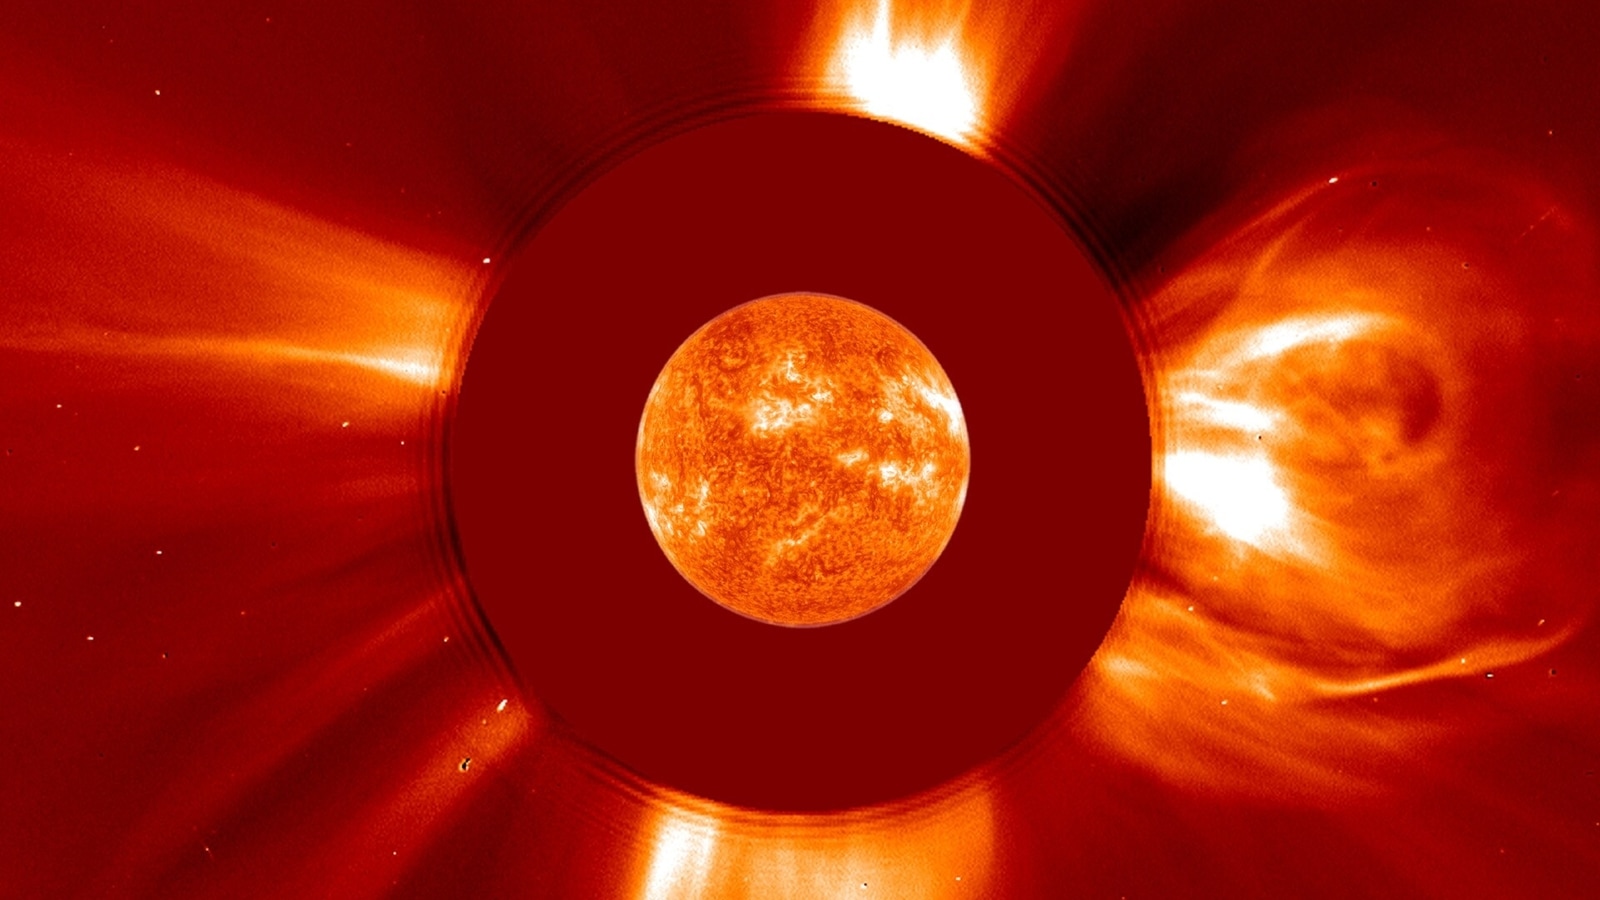 Do you know when the biggest solar flare ever was recorded? NASA